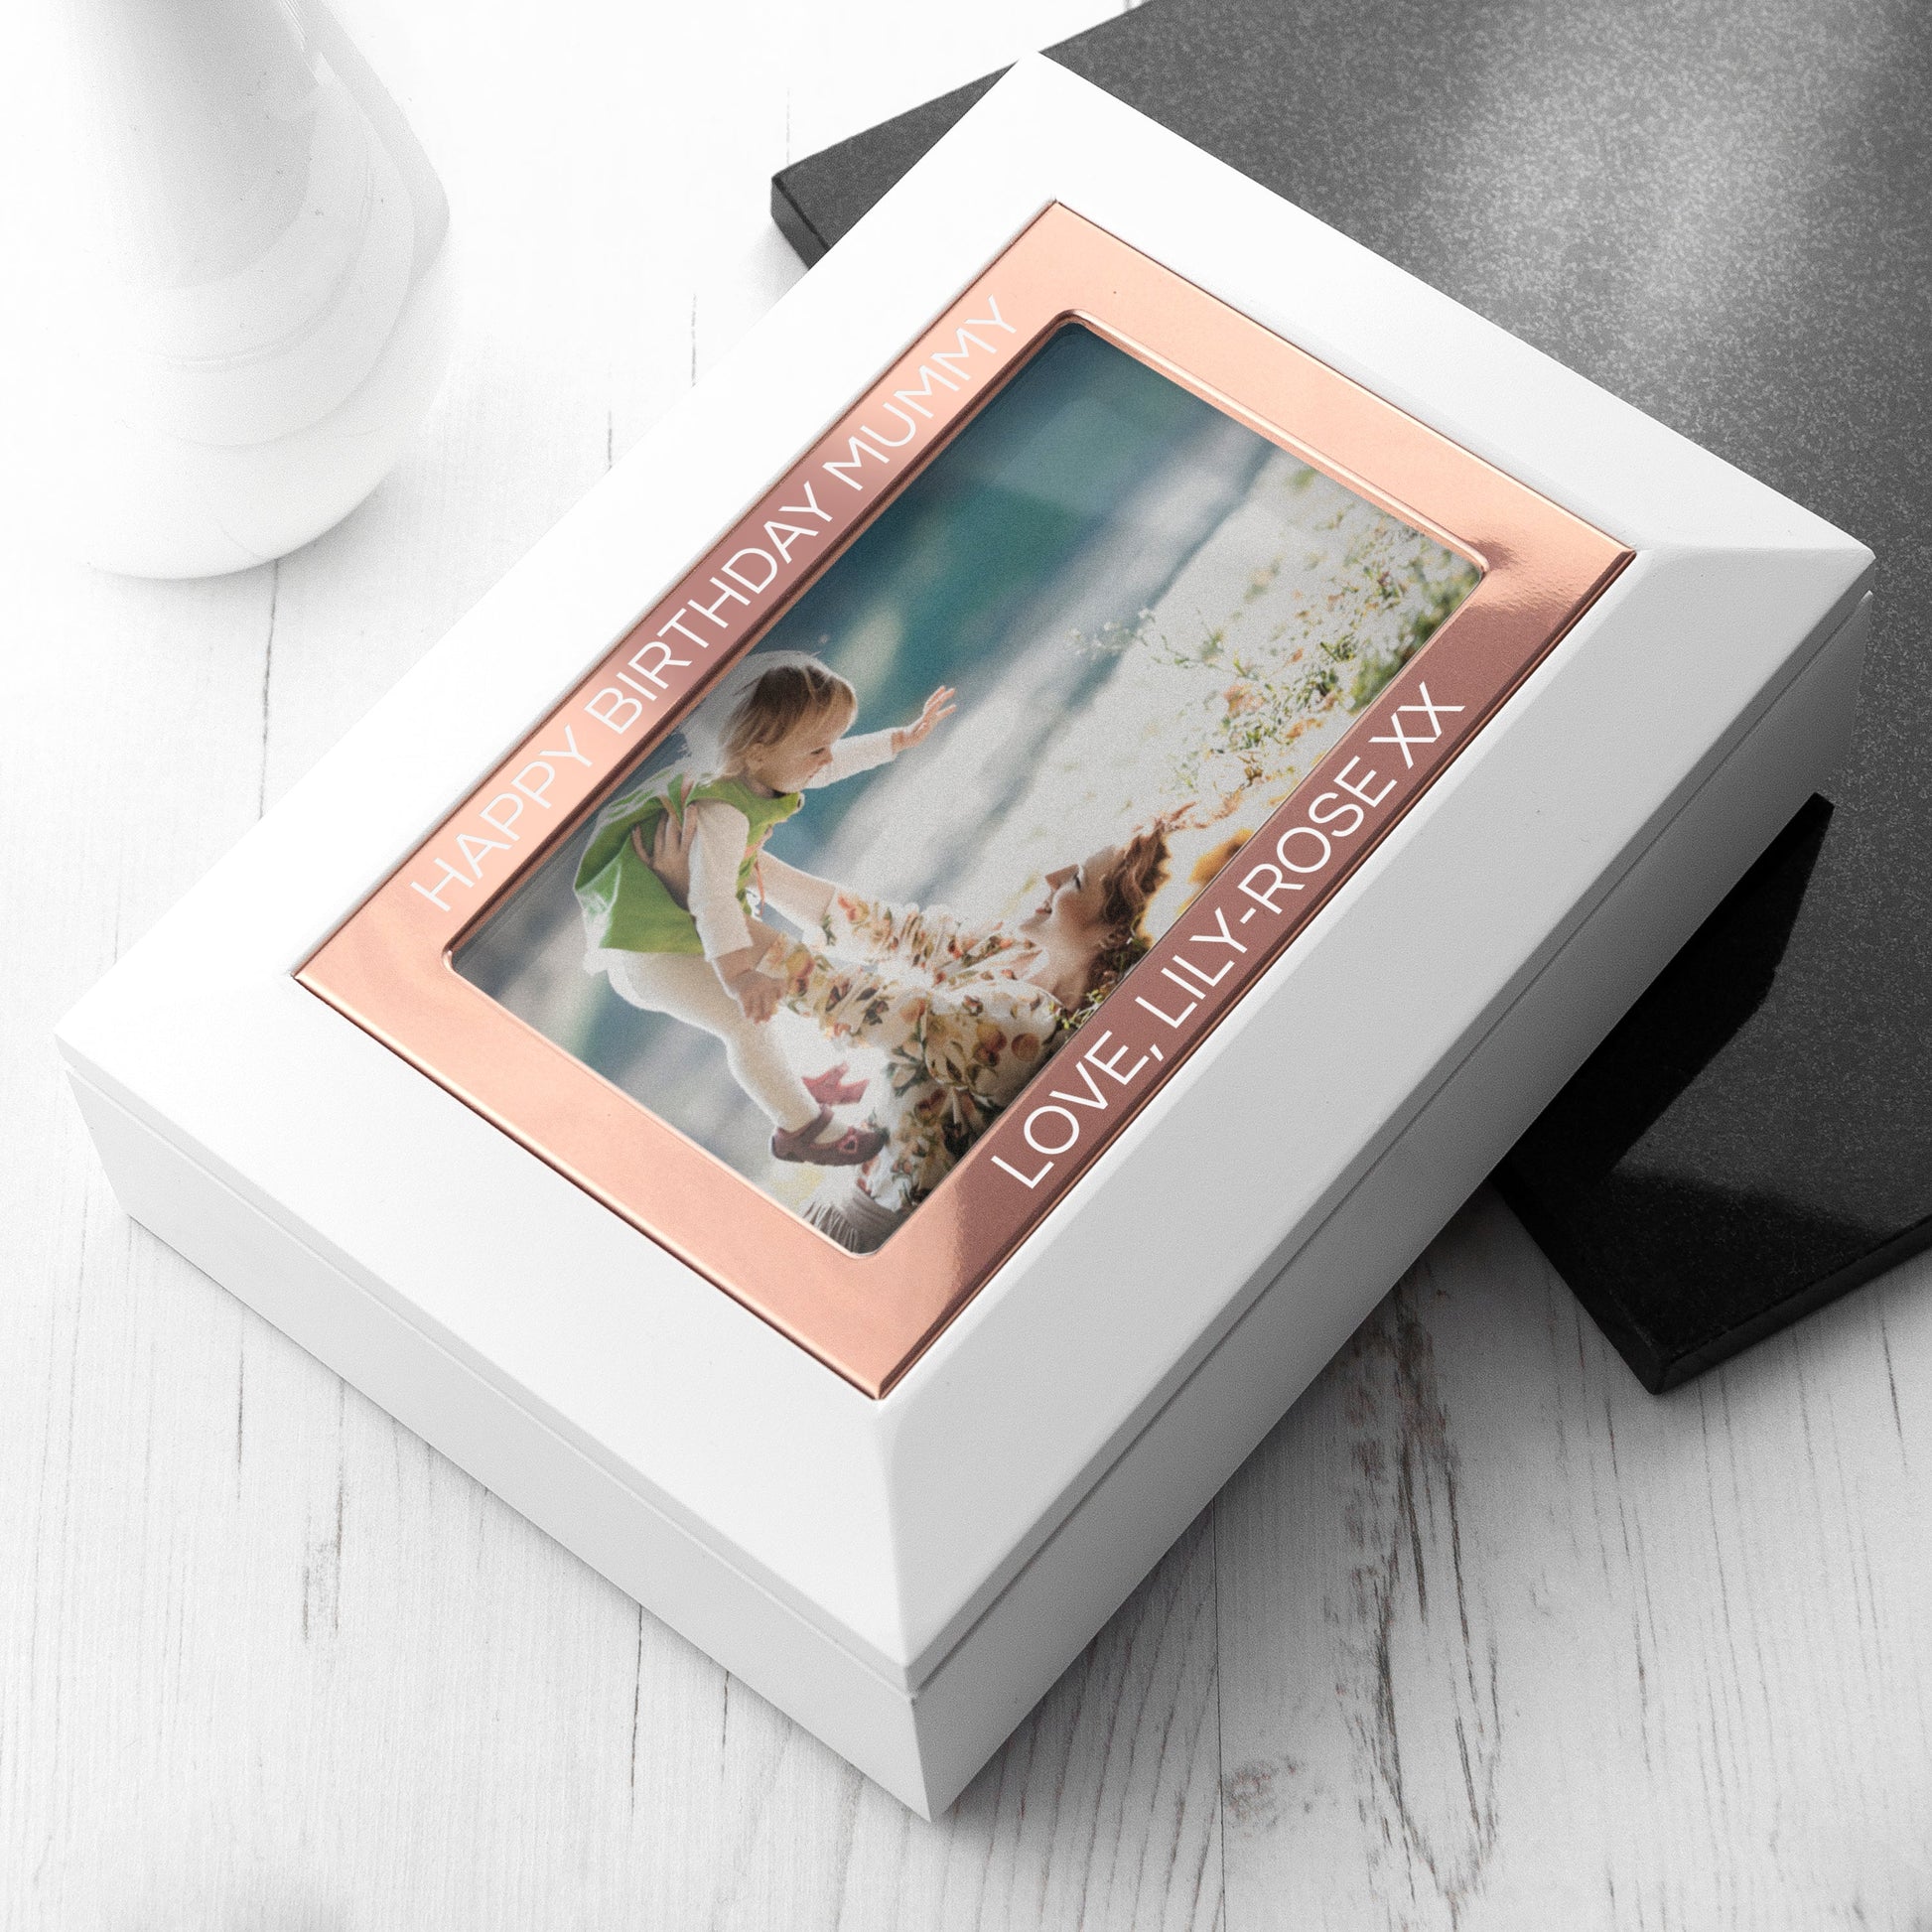 Personalized Jewellery Boxes & Storage - Personalized Jewelry Box - White and Rose Gold 